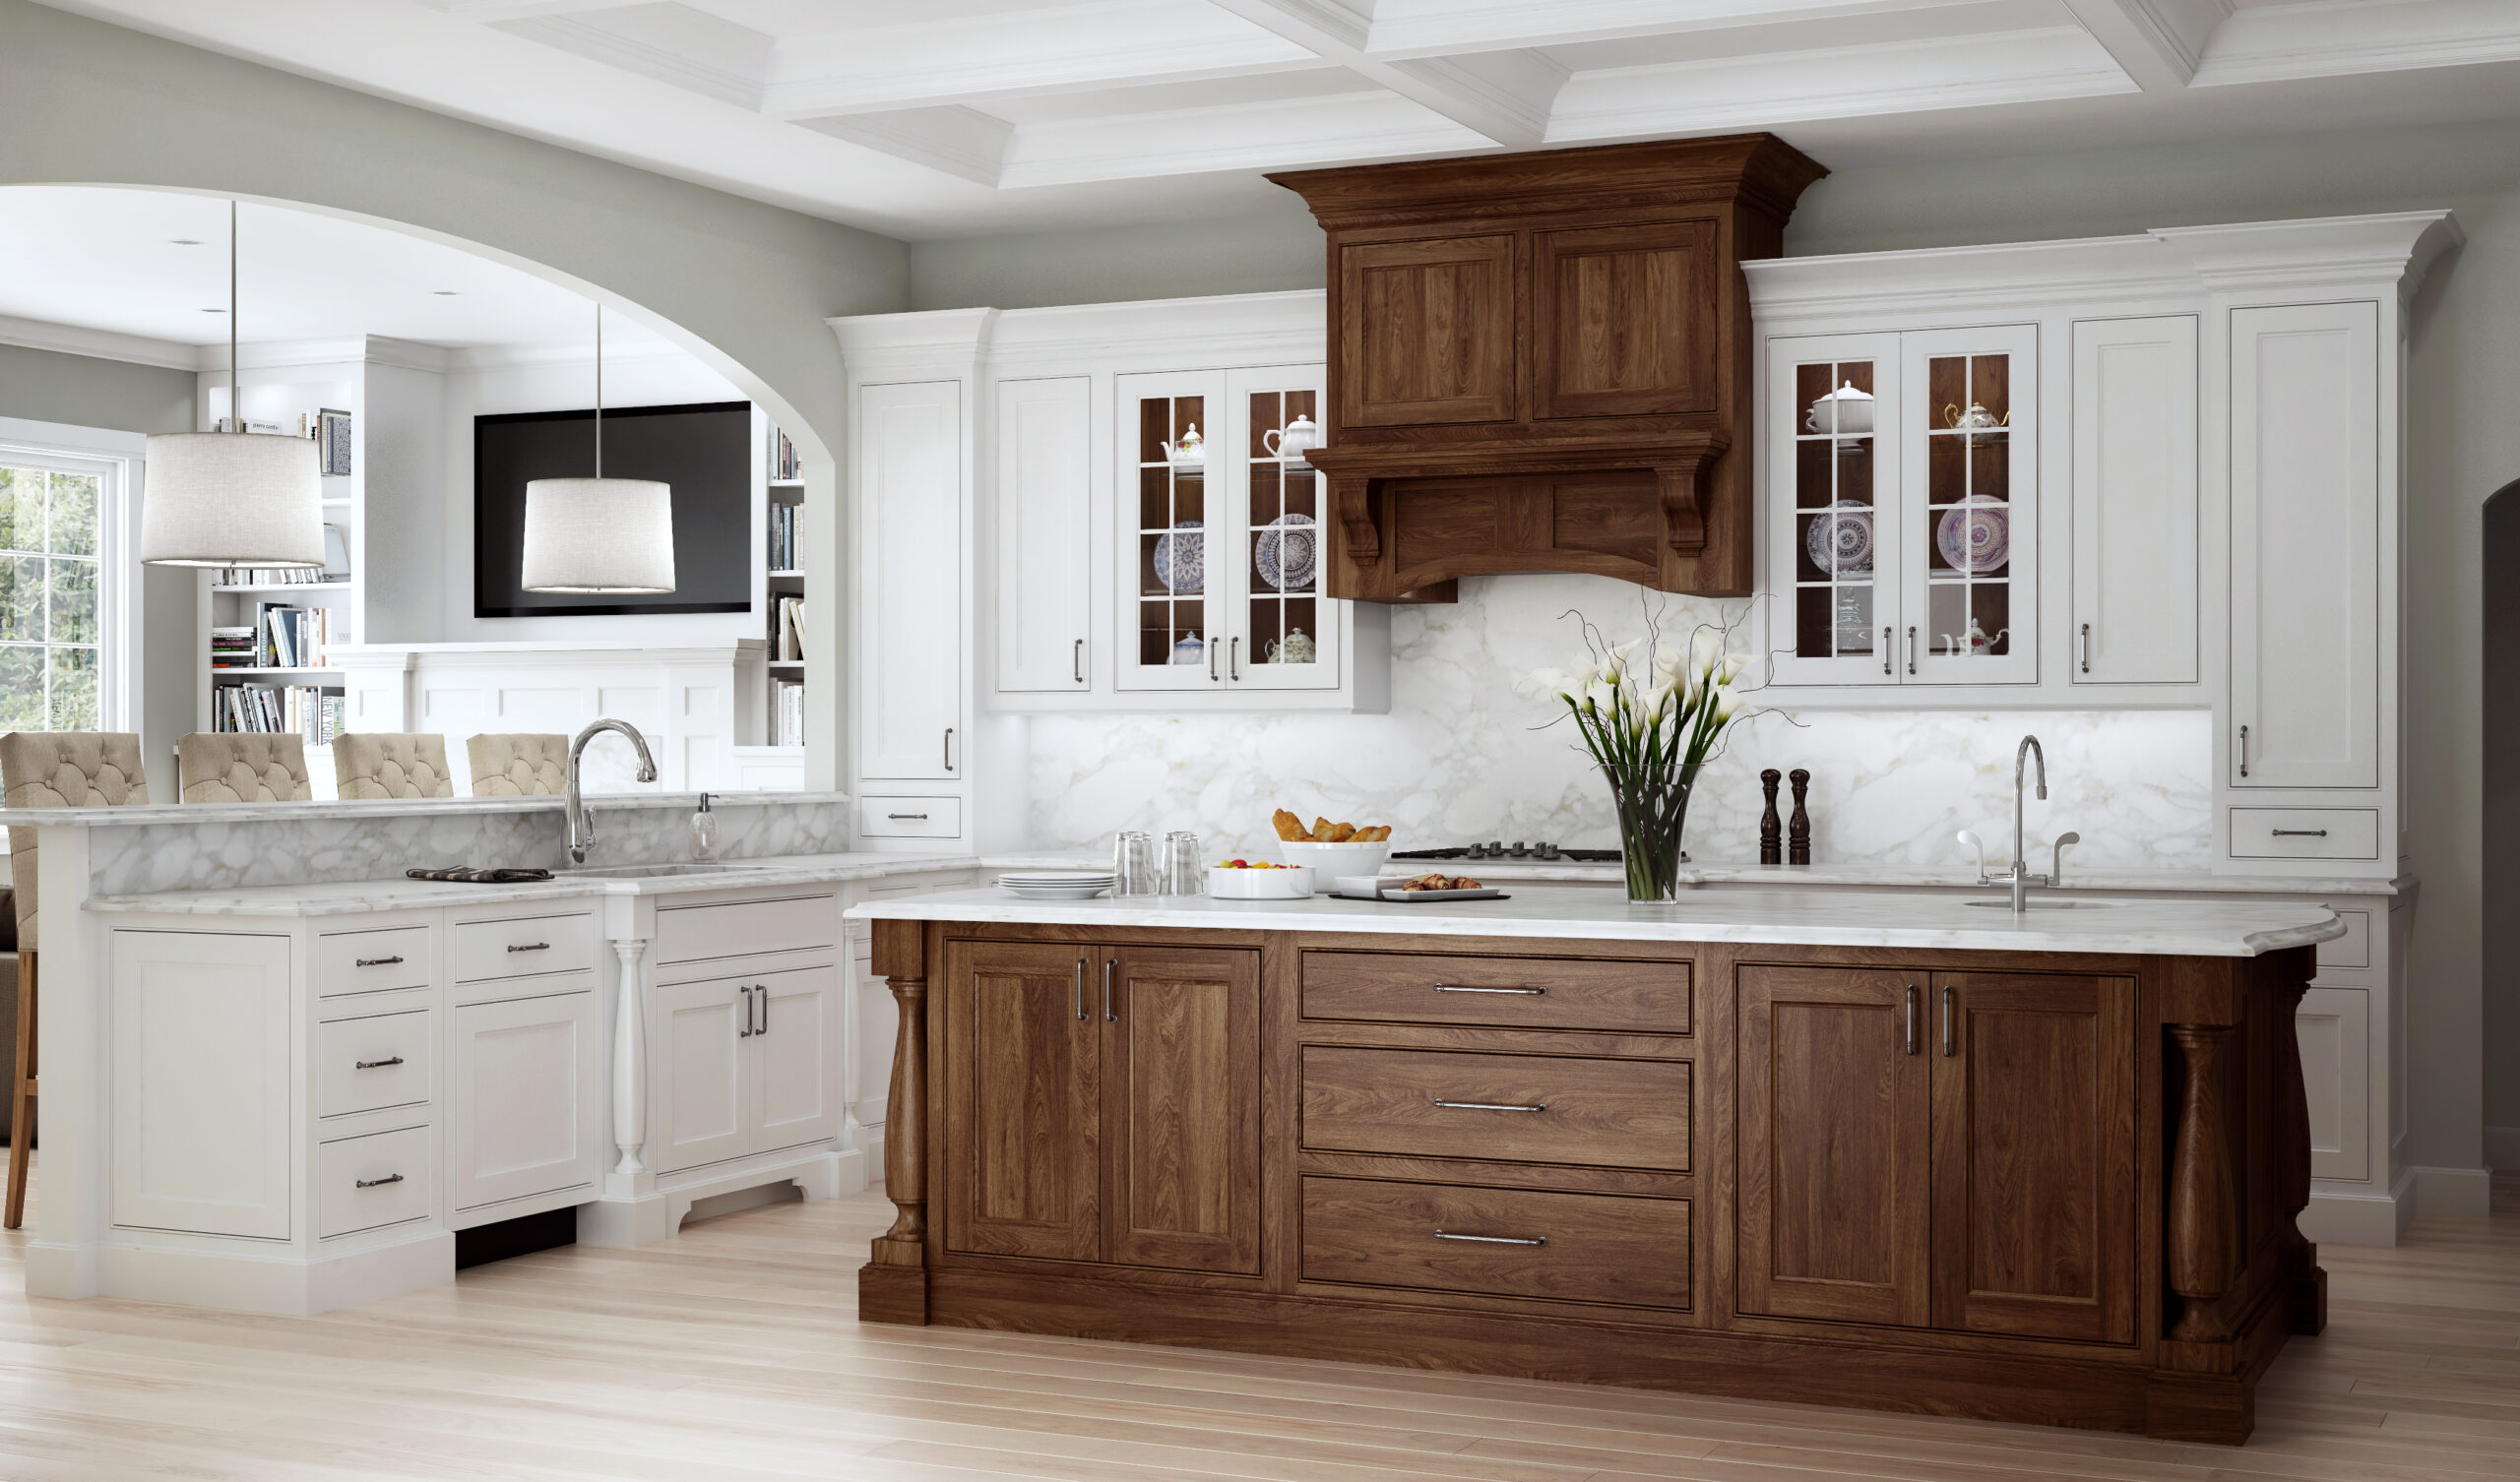 Choosing Cabinetry Finishes